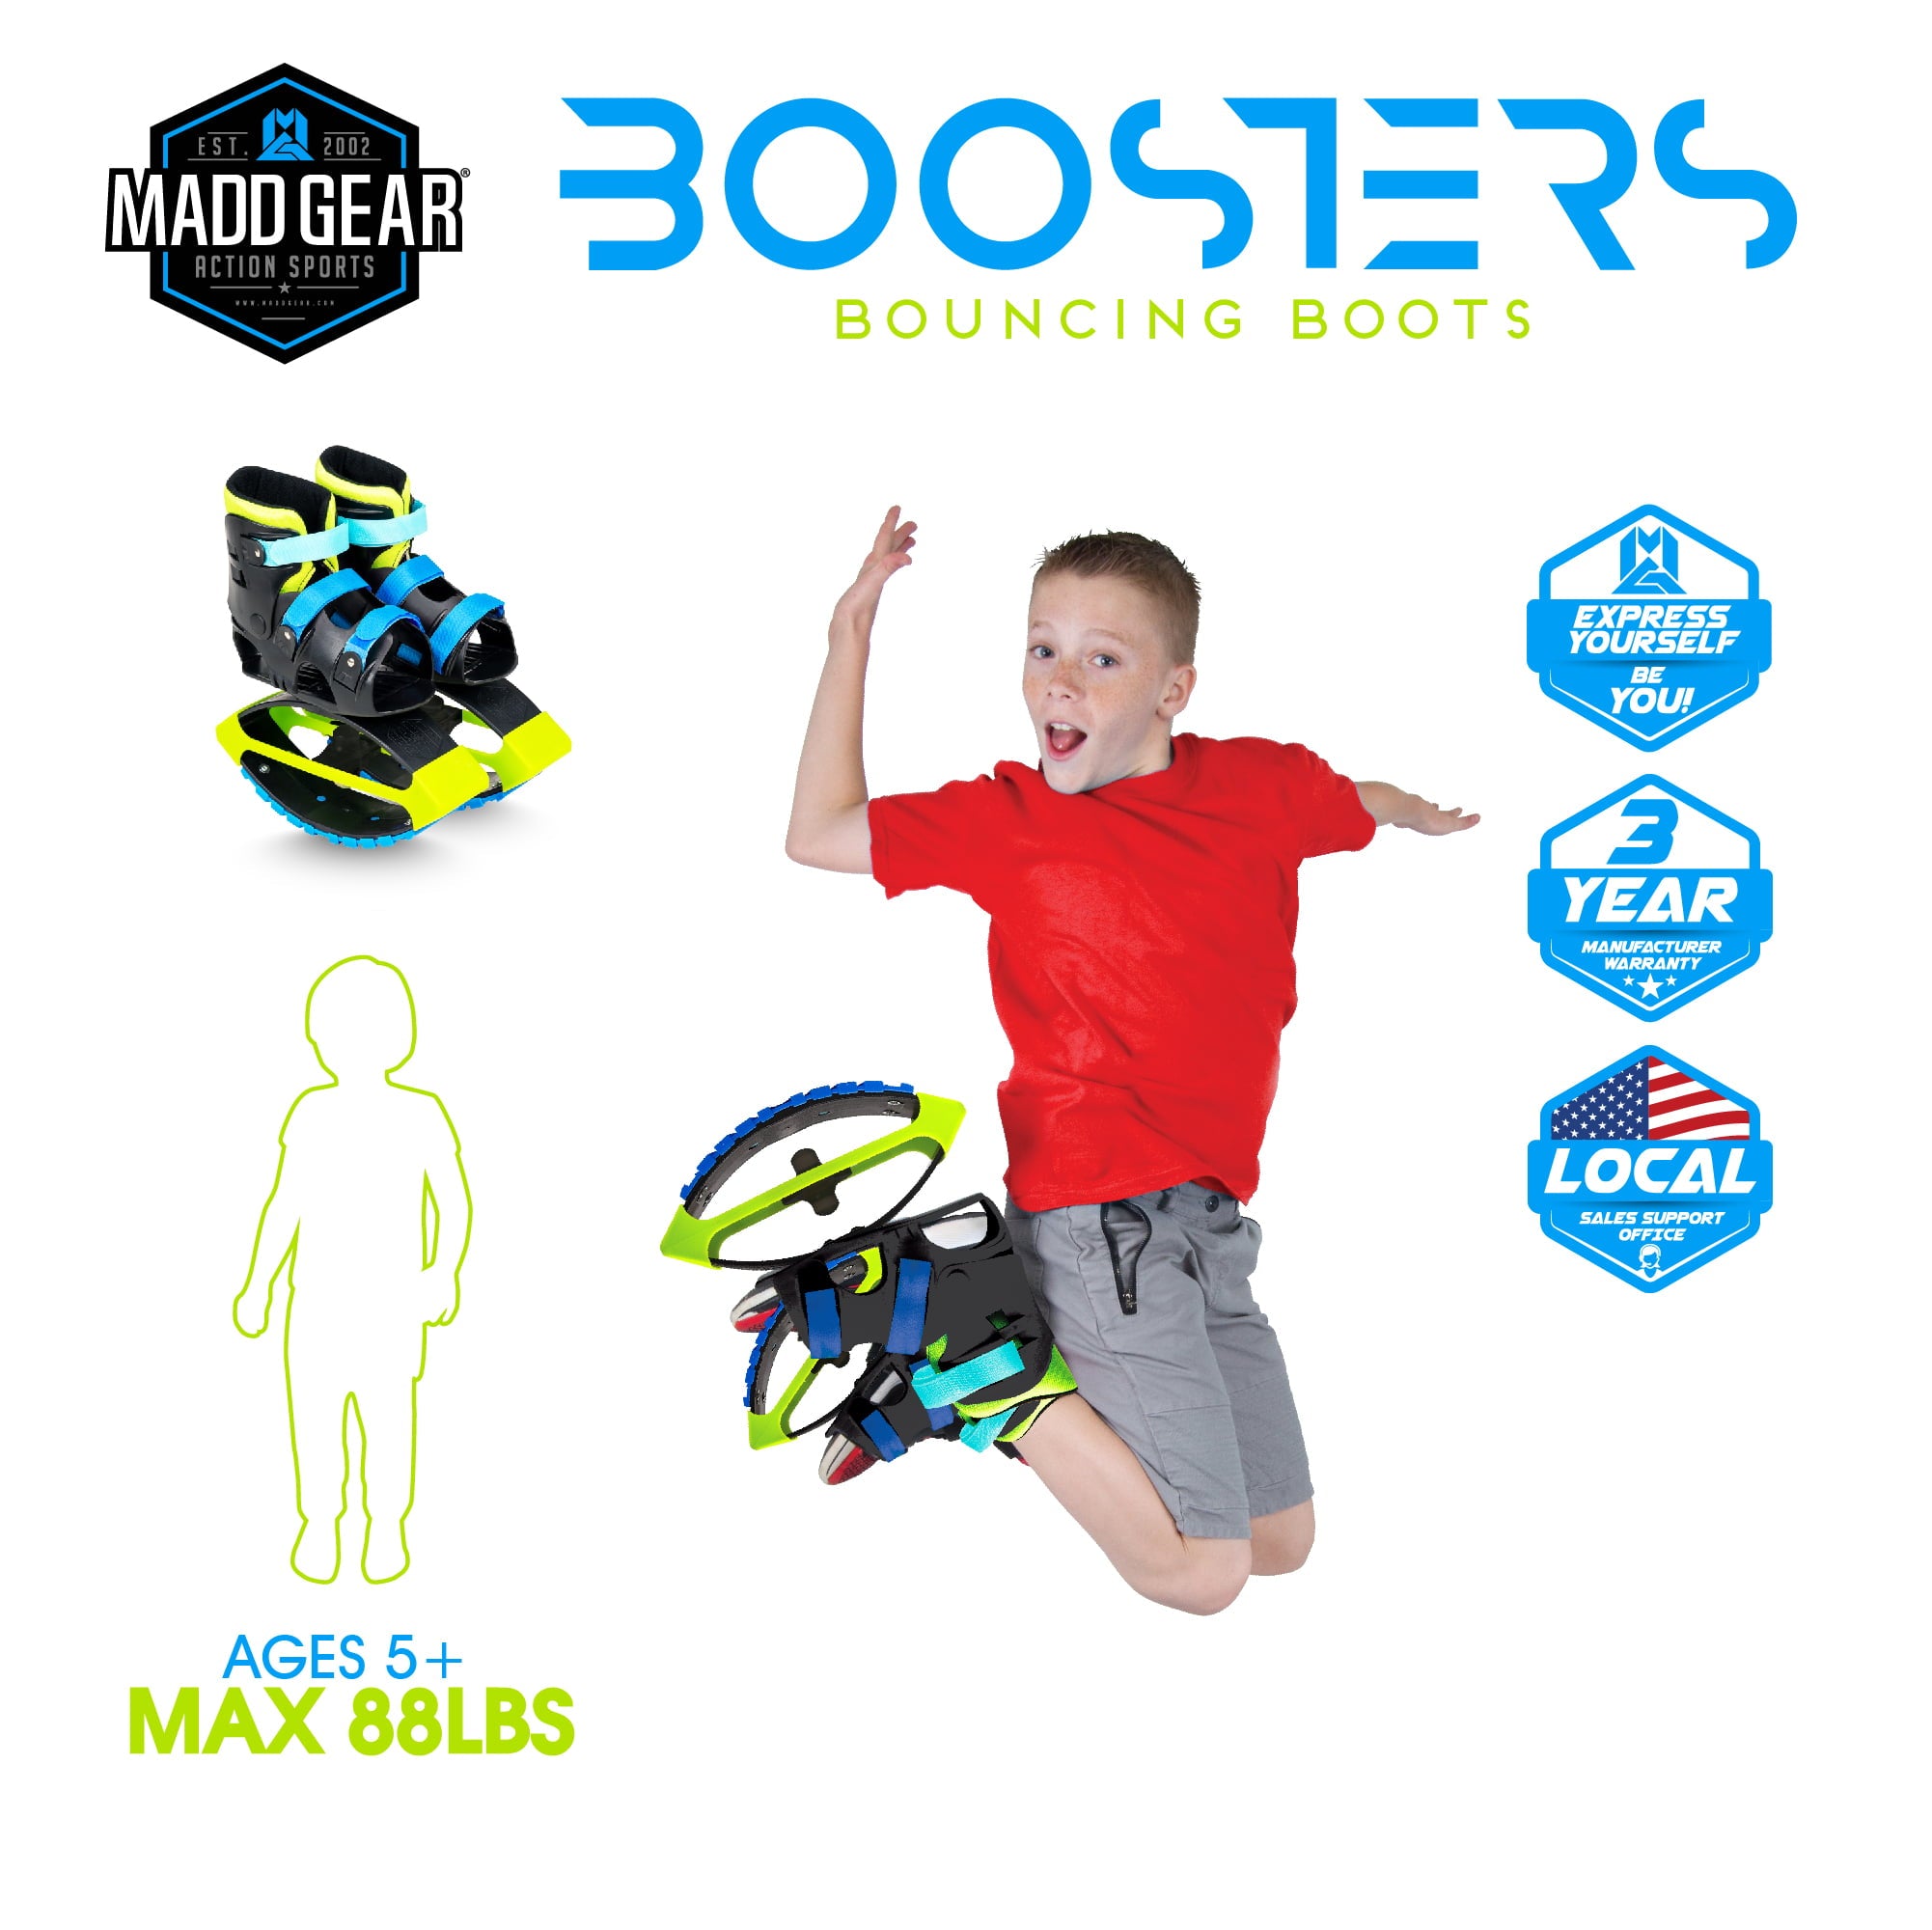 image 5 of Madd Gear Light Up Boost Boots Jumping Shoes - Bounce to the Moon - Fun & Fitness - Unisex